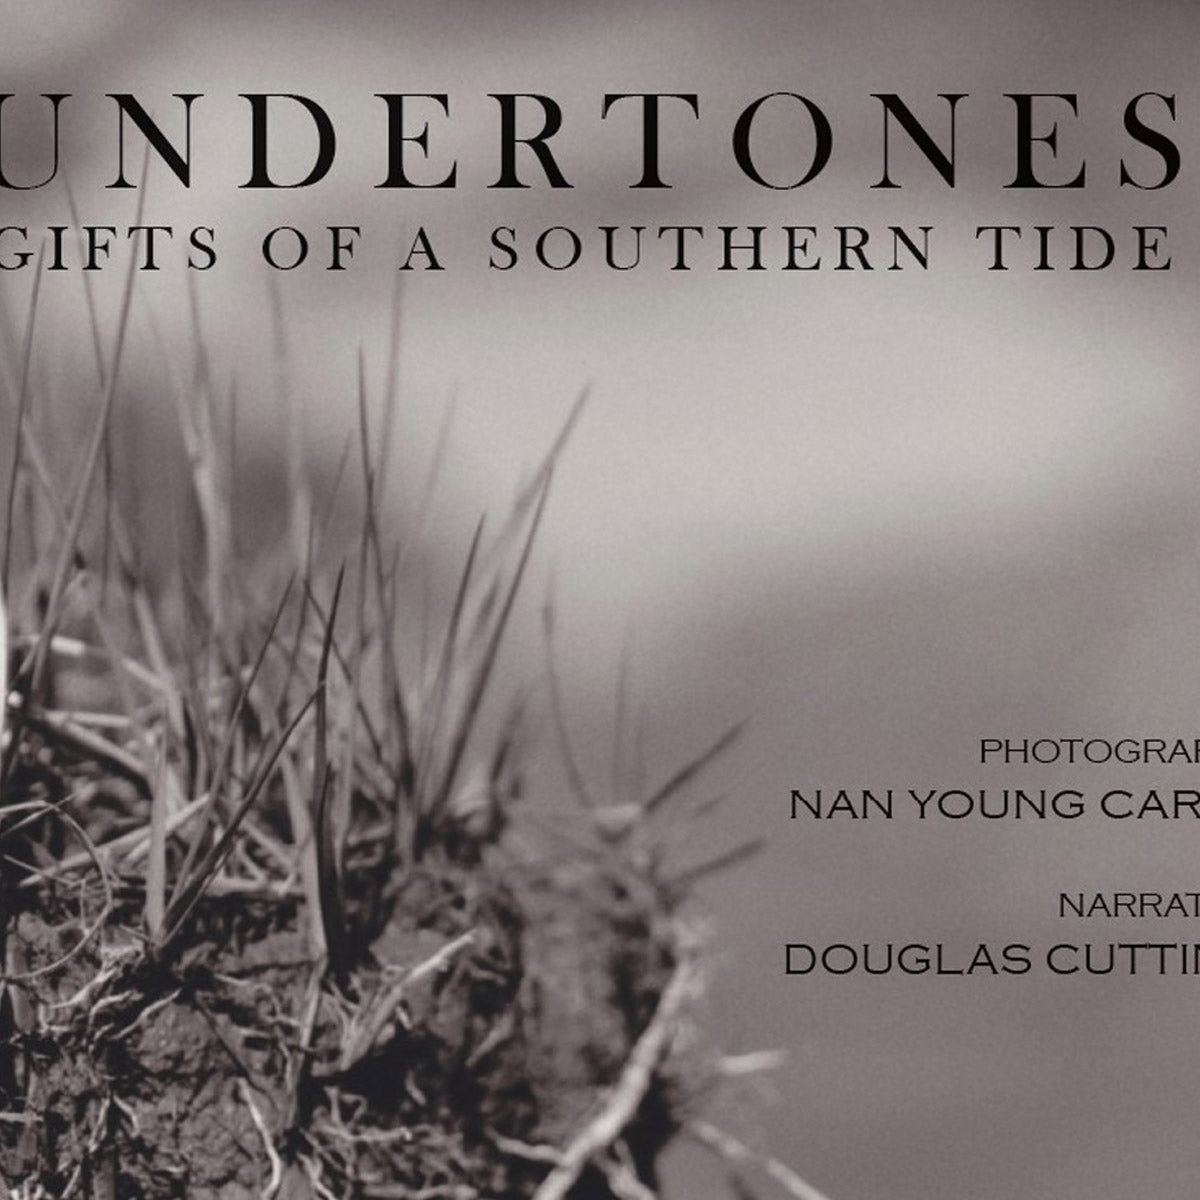 Undertones: Gifts of a Southern Tide